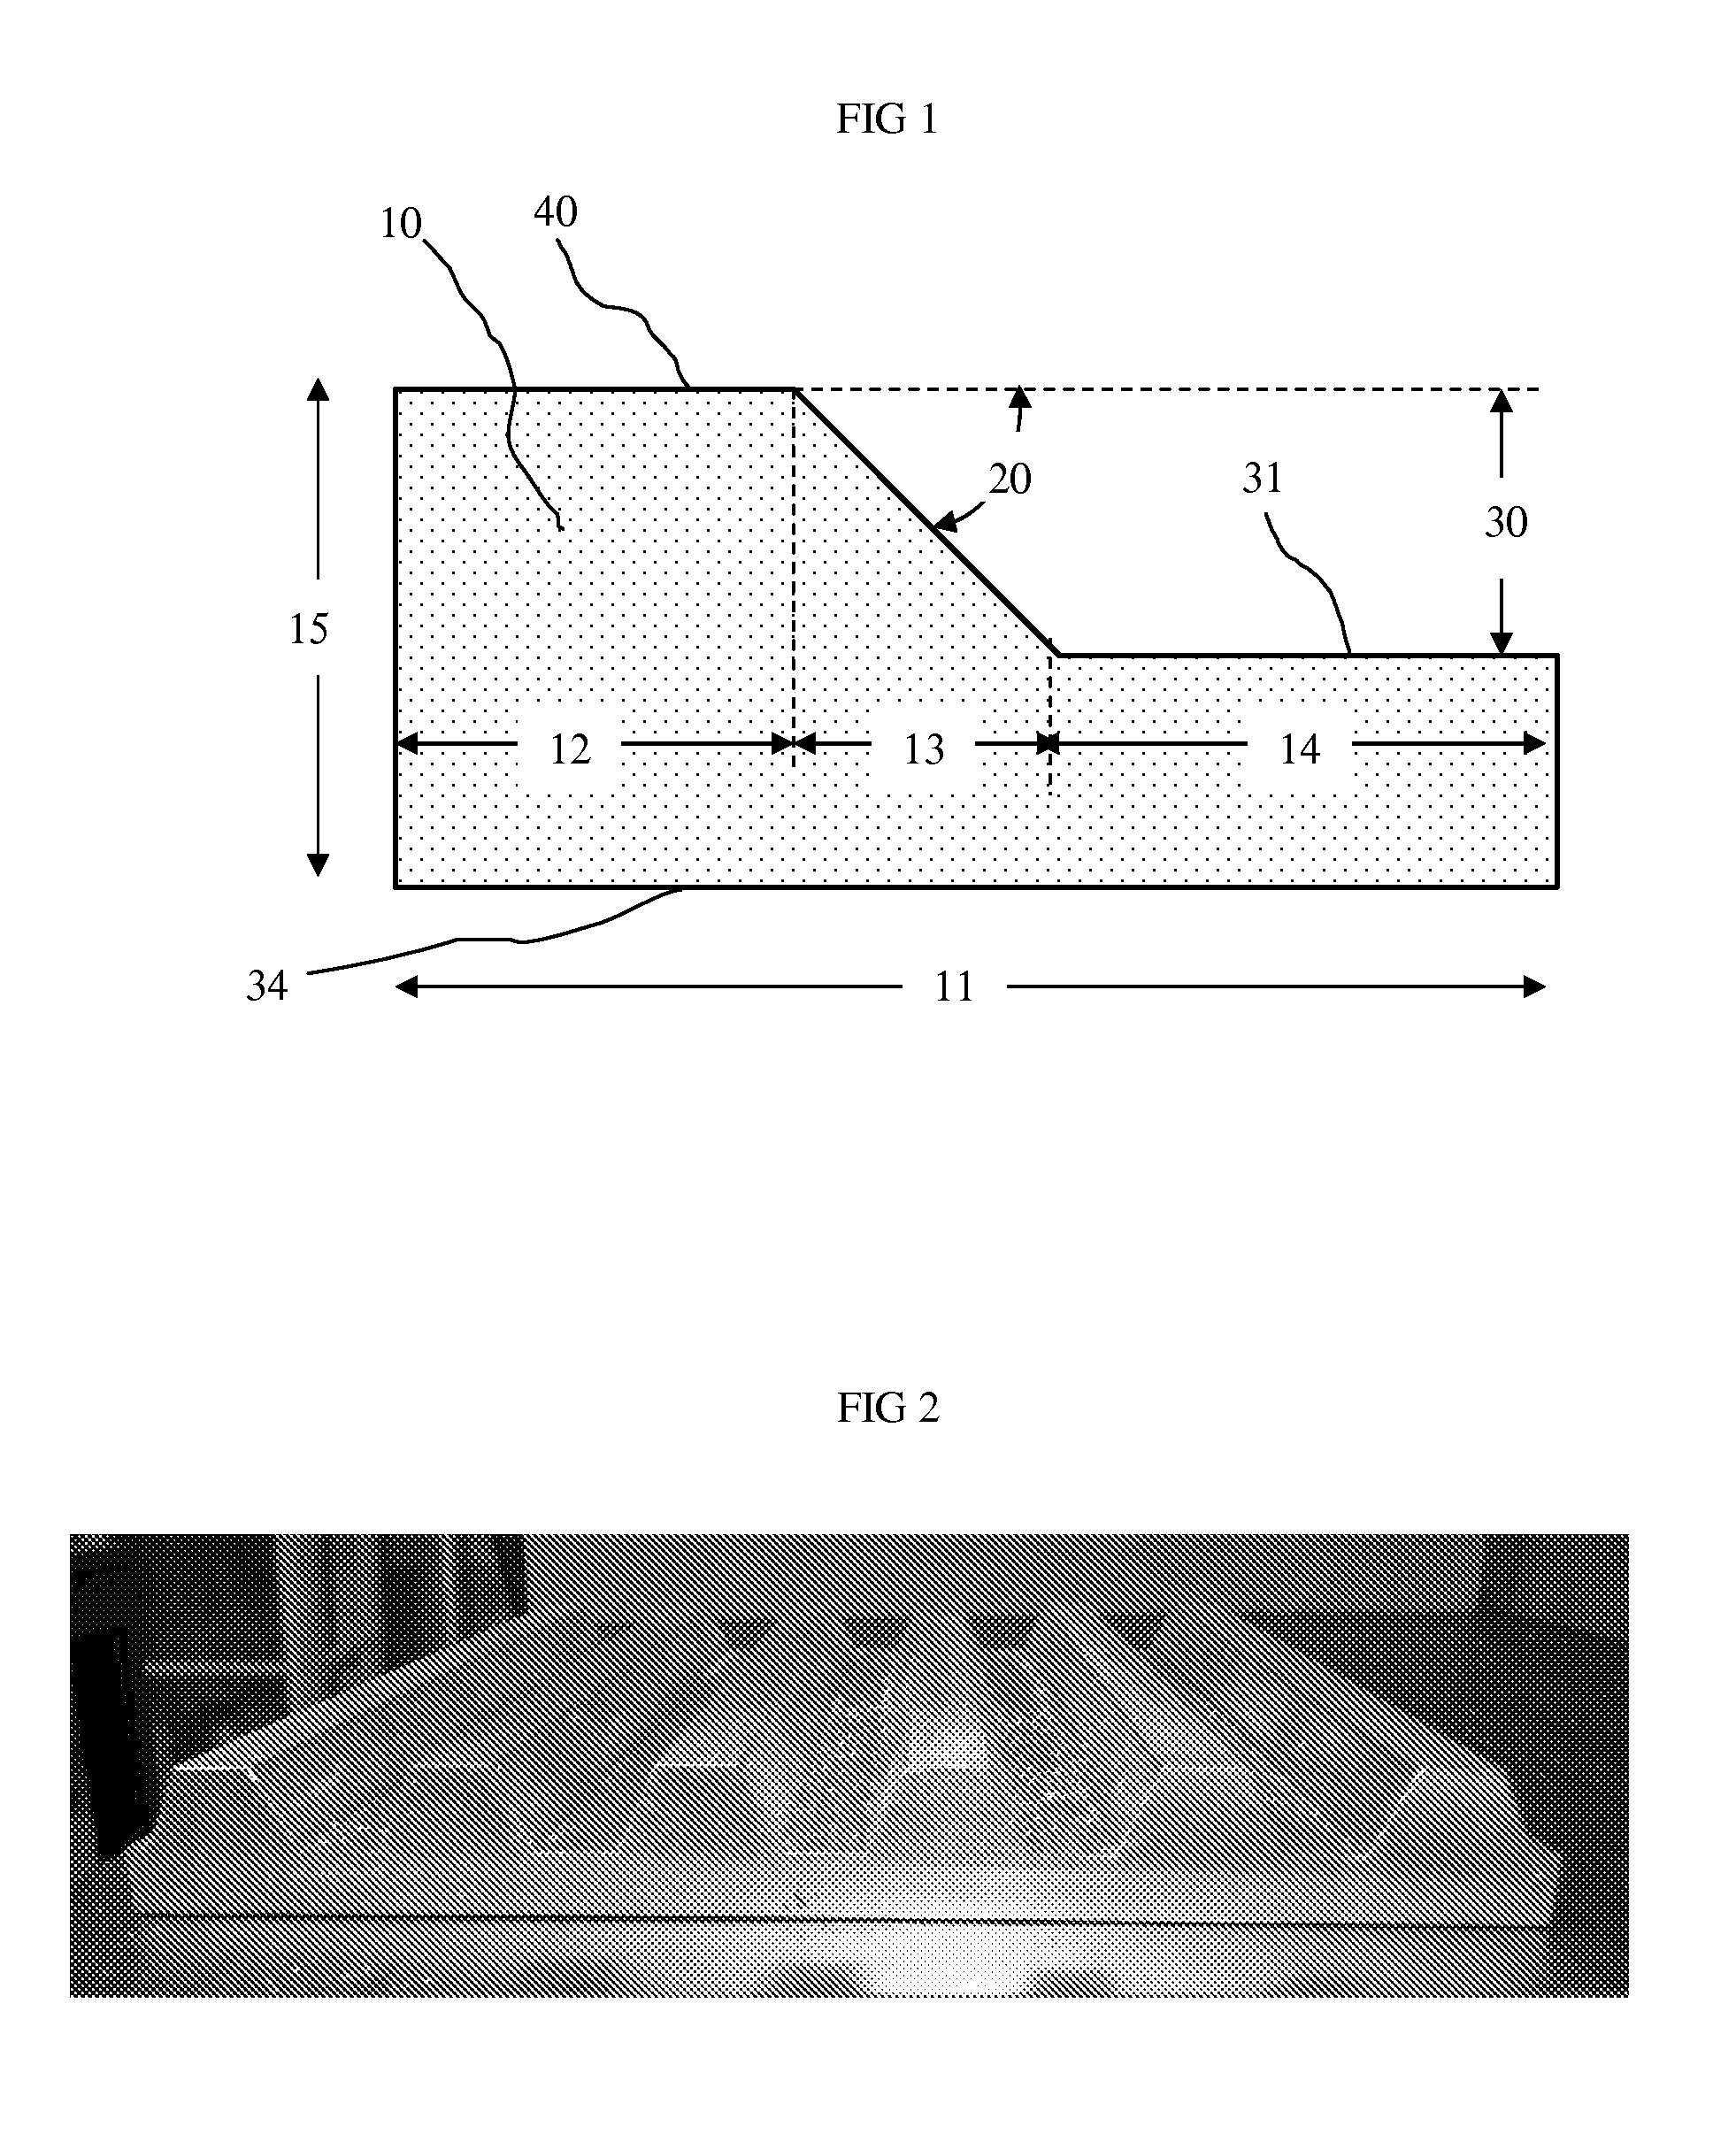 Process for manufacturing a shaped foam composite article